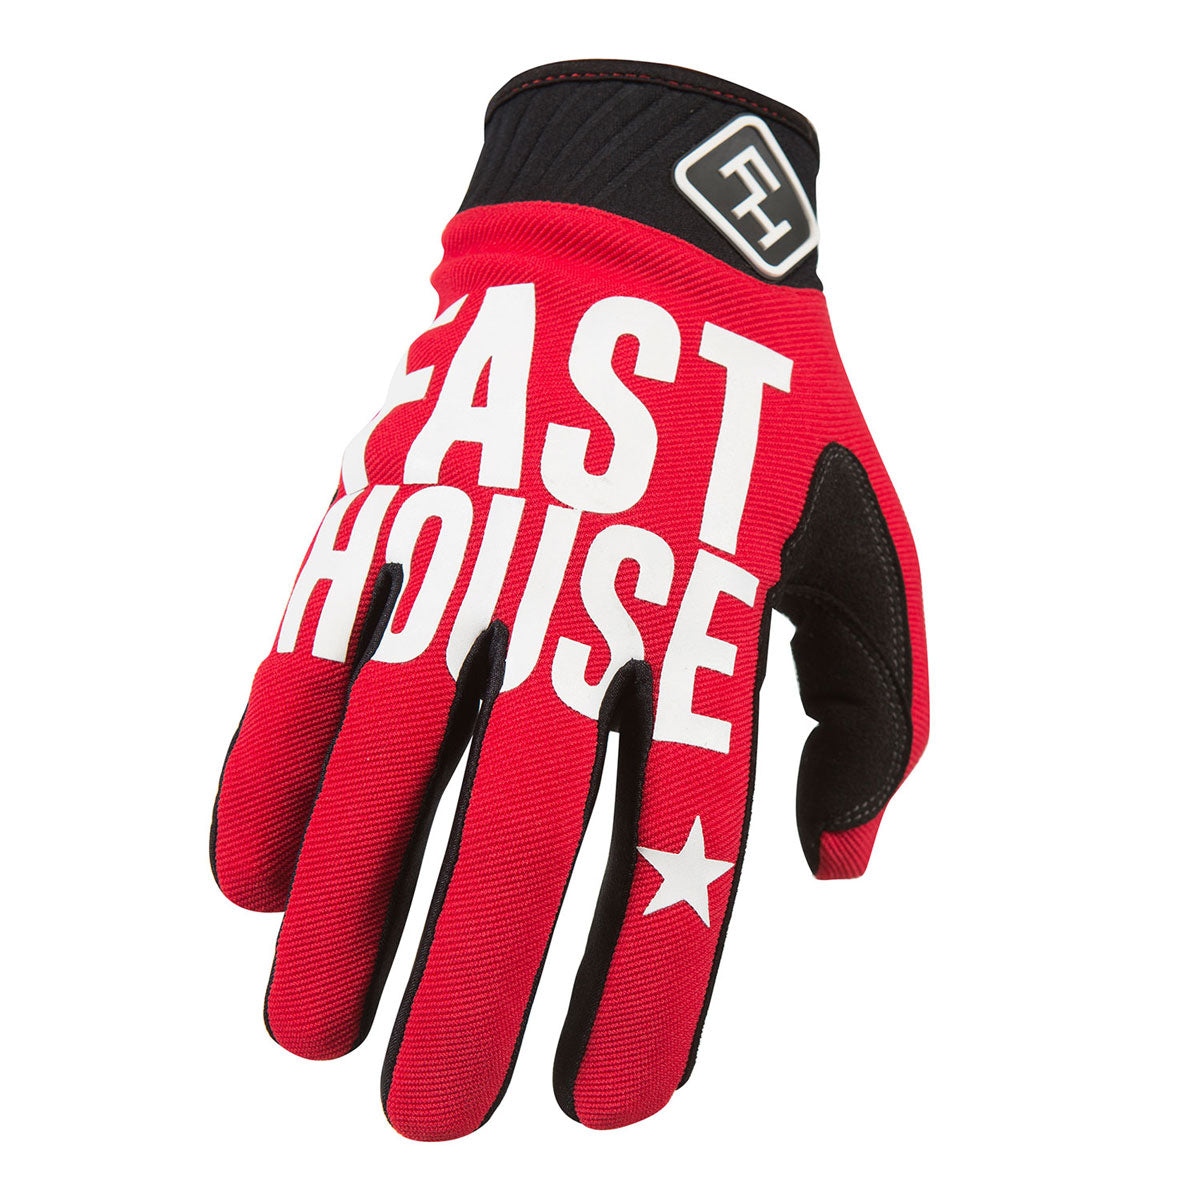 Fasthouse - Grindhouse Glove - Red